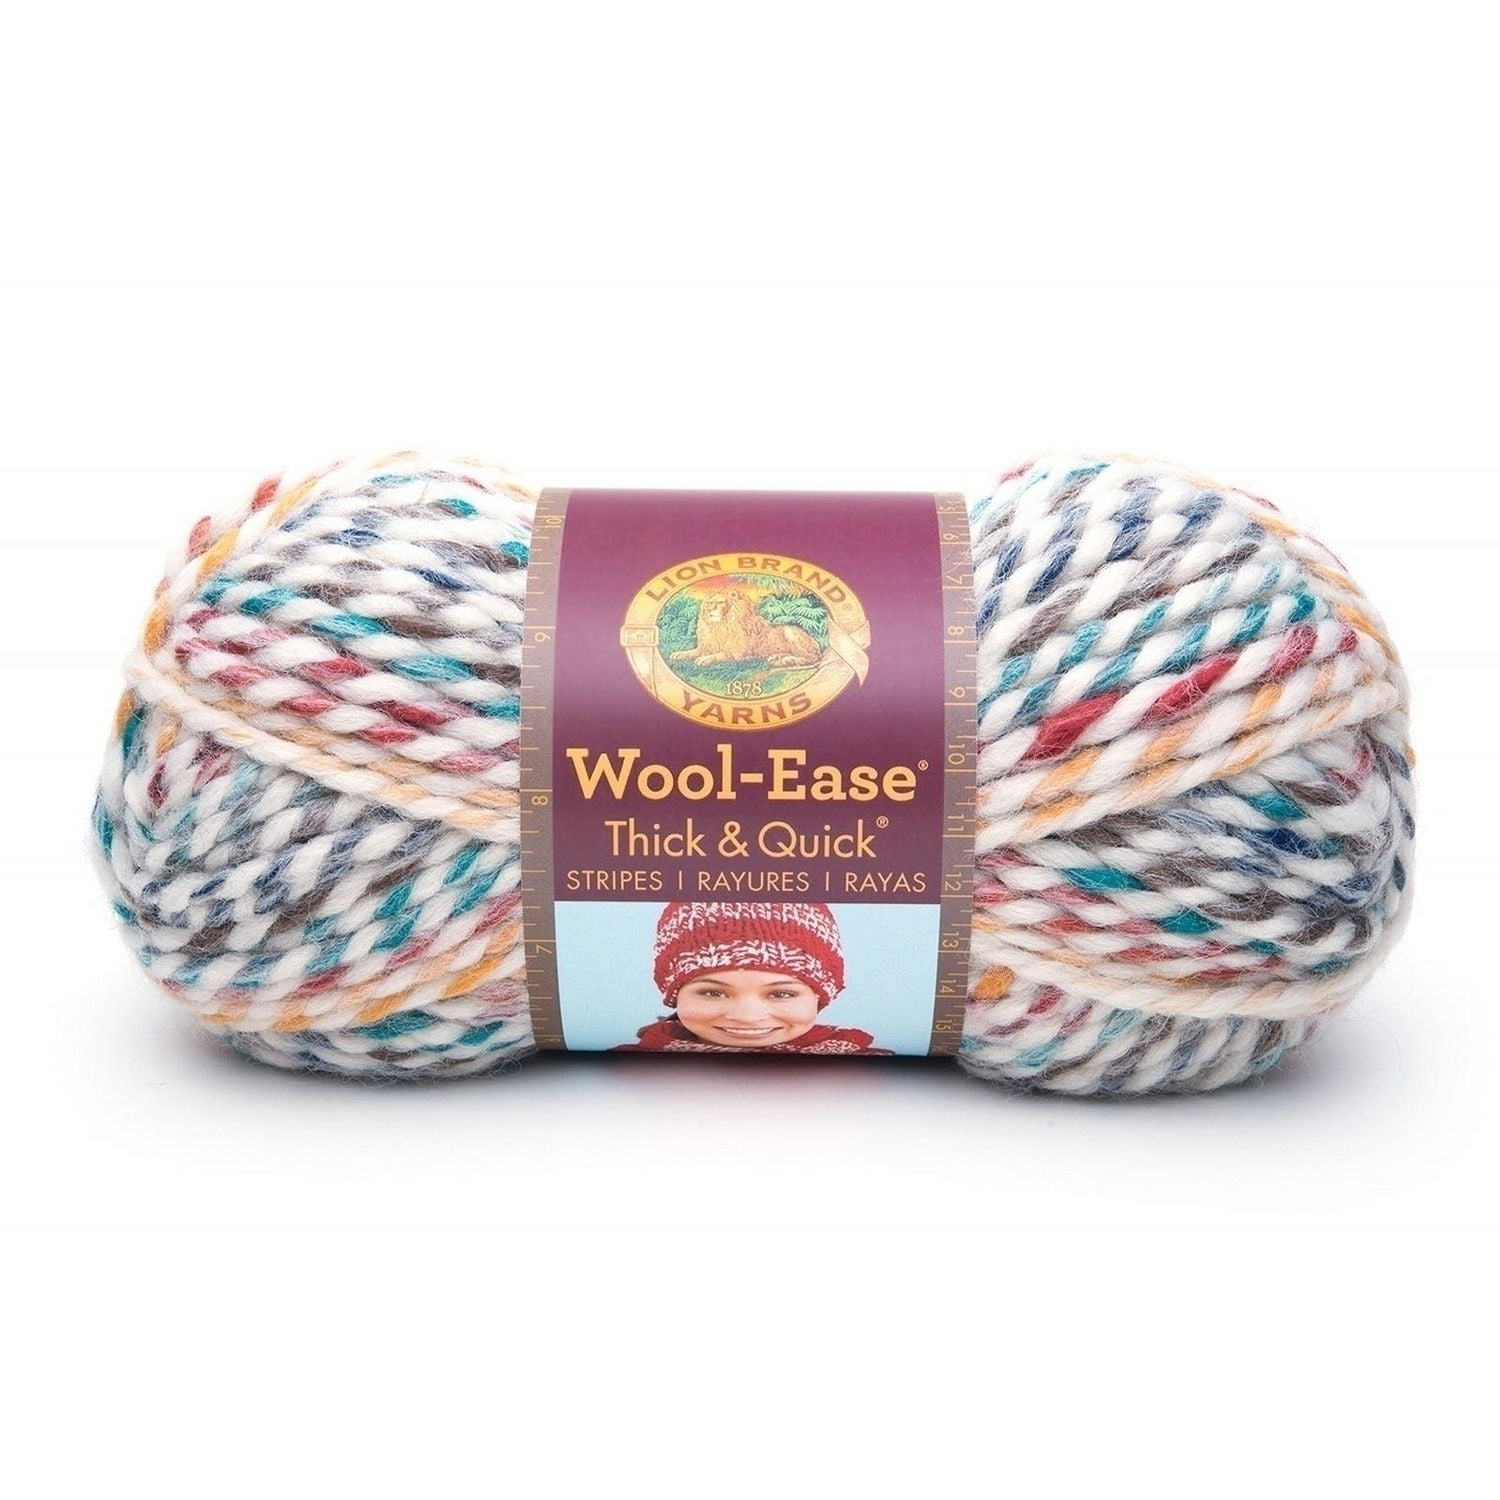 Lion Brand Yarn Wool Ease Thick & Quick Hudson Bay 640-610 Classic